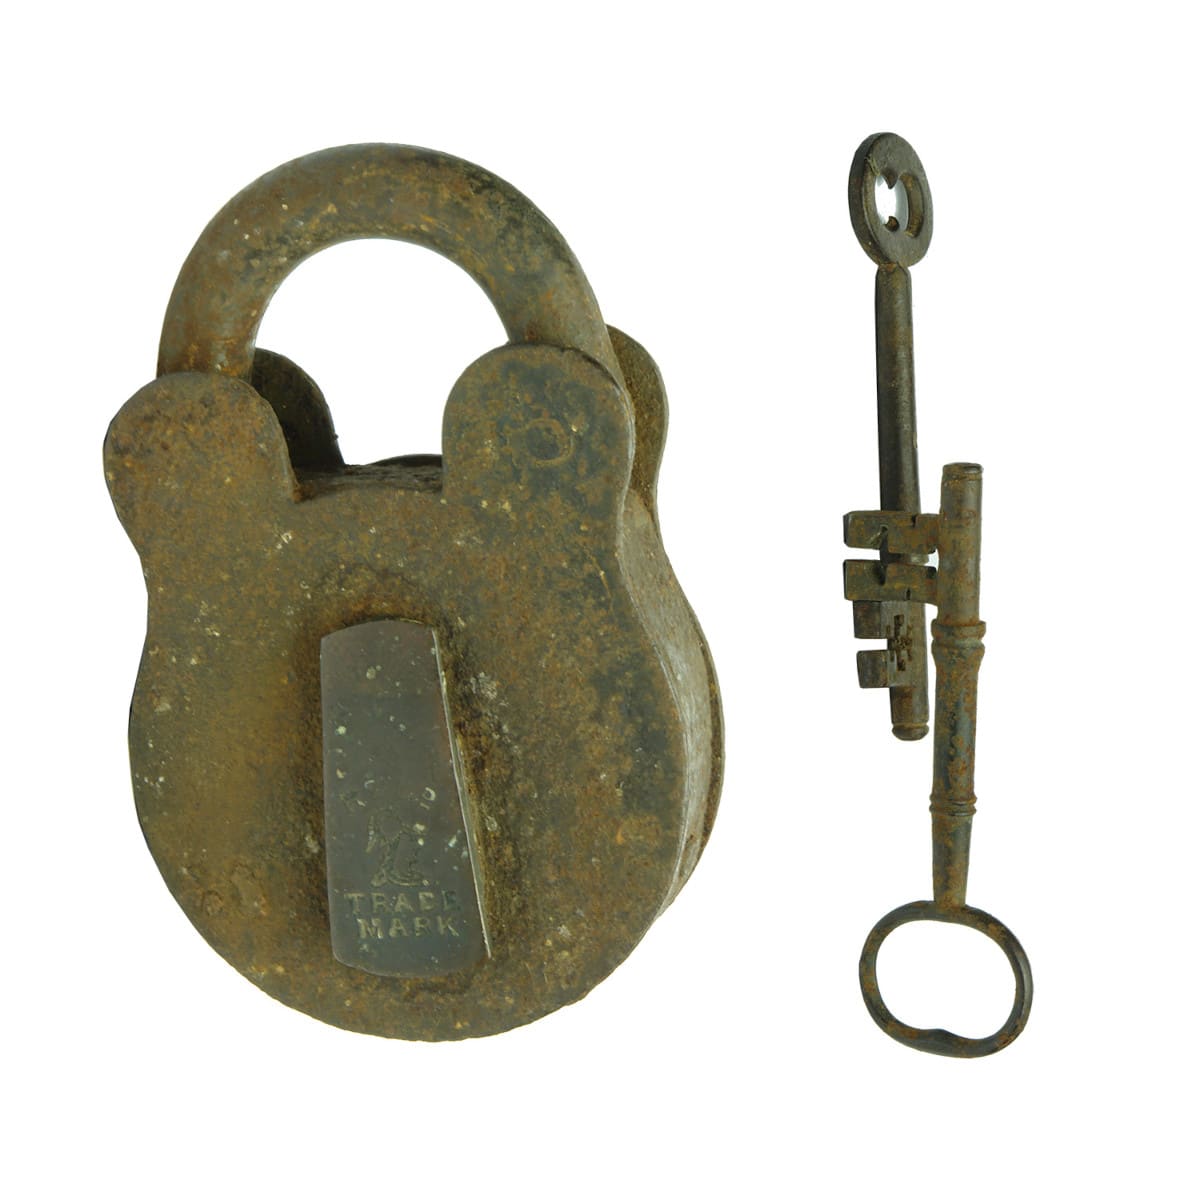 Miscellaneous. Padlock with man's head and two old keys.